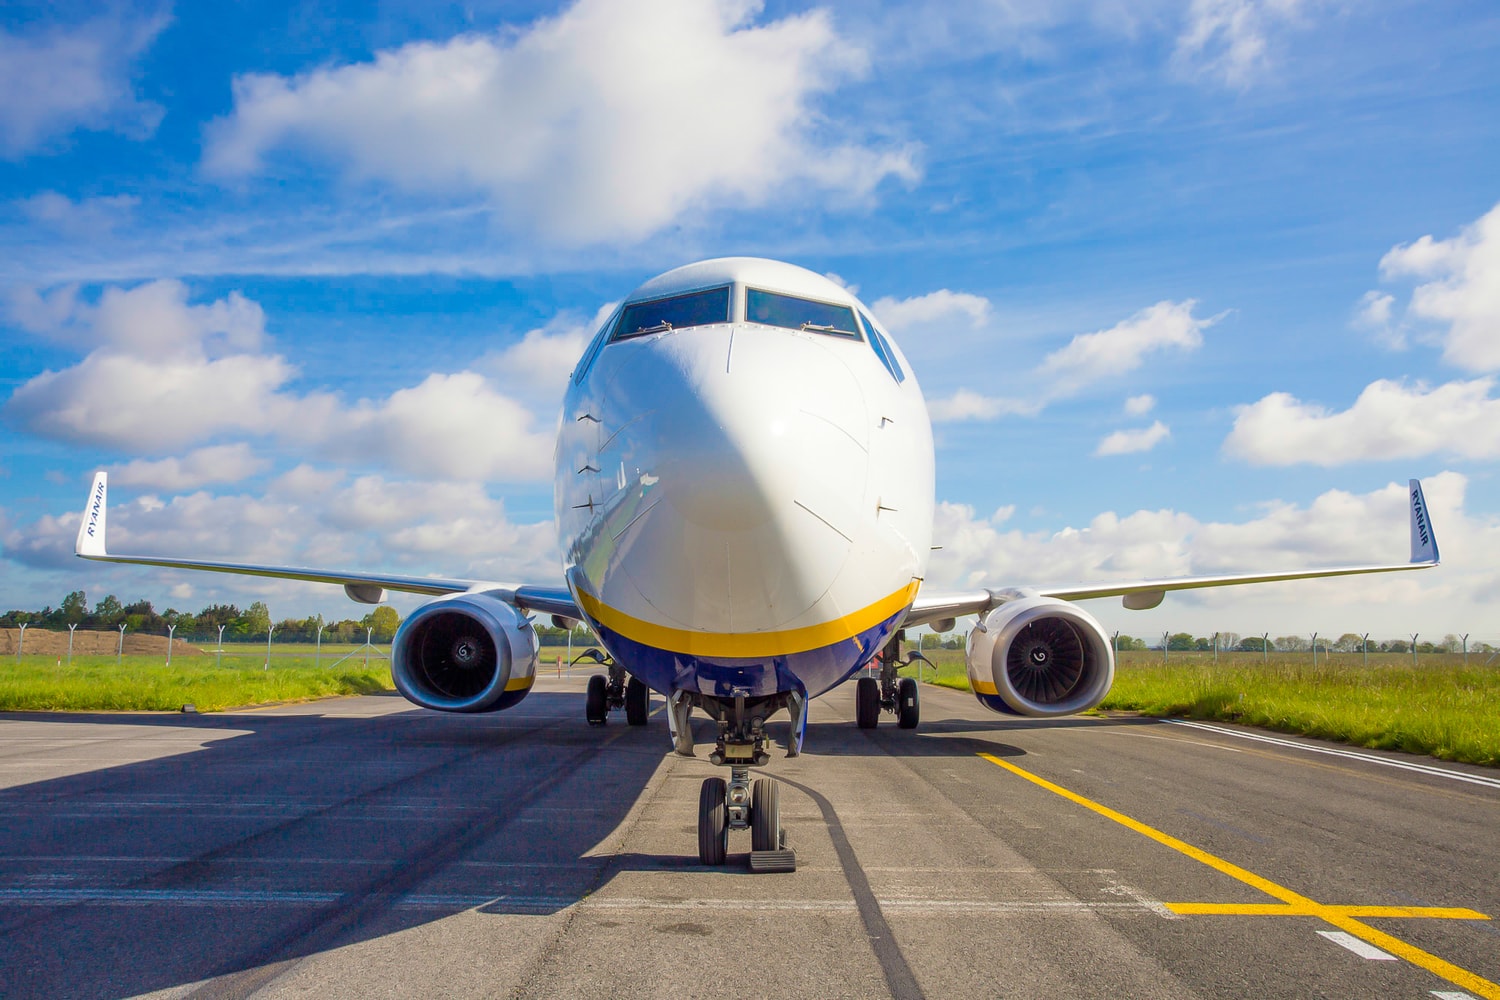 RYANAIR ANNOUNCES MAJOR RECRUITMENT DRIVE FOR IRELAND TO FILL OVER 150 EXCITING TECH ROLES